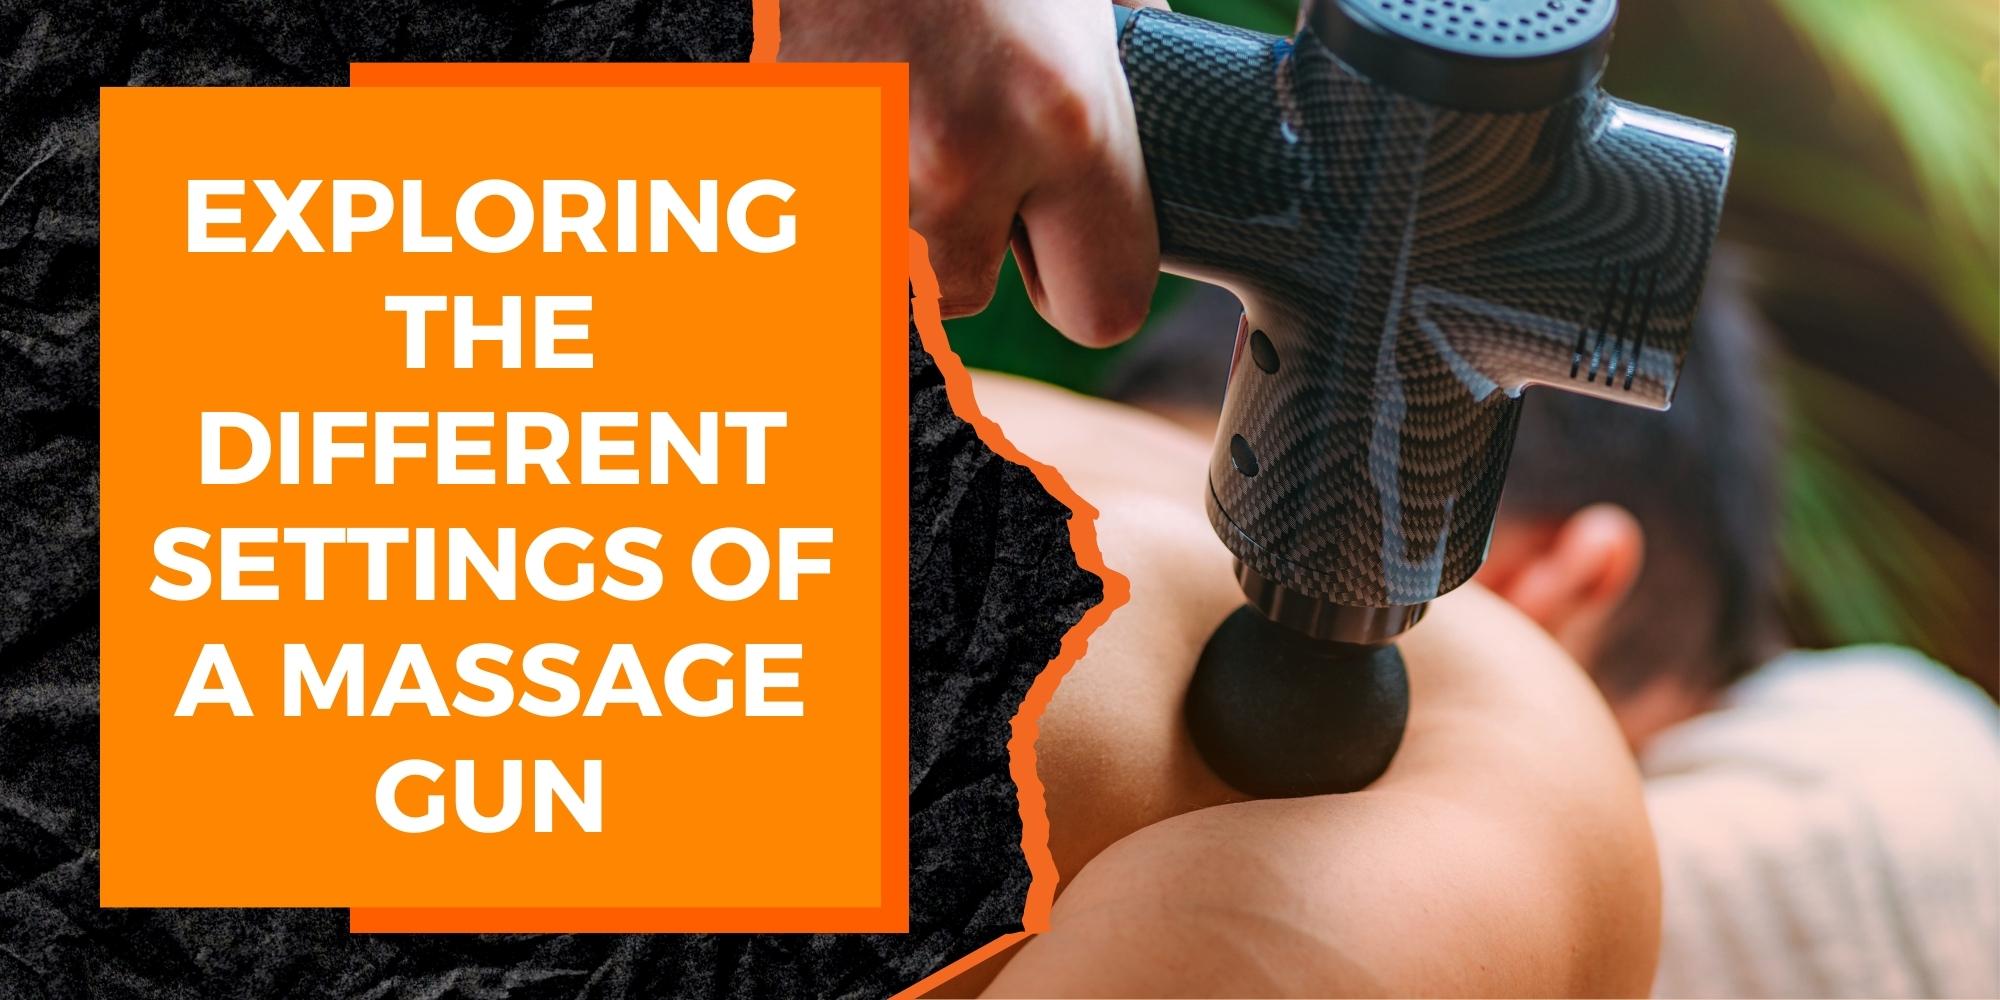 Exploring the Different Settings of a Massage Gun